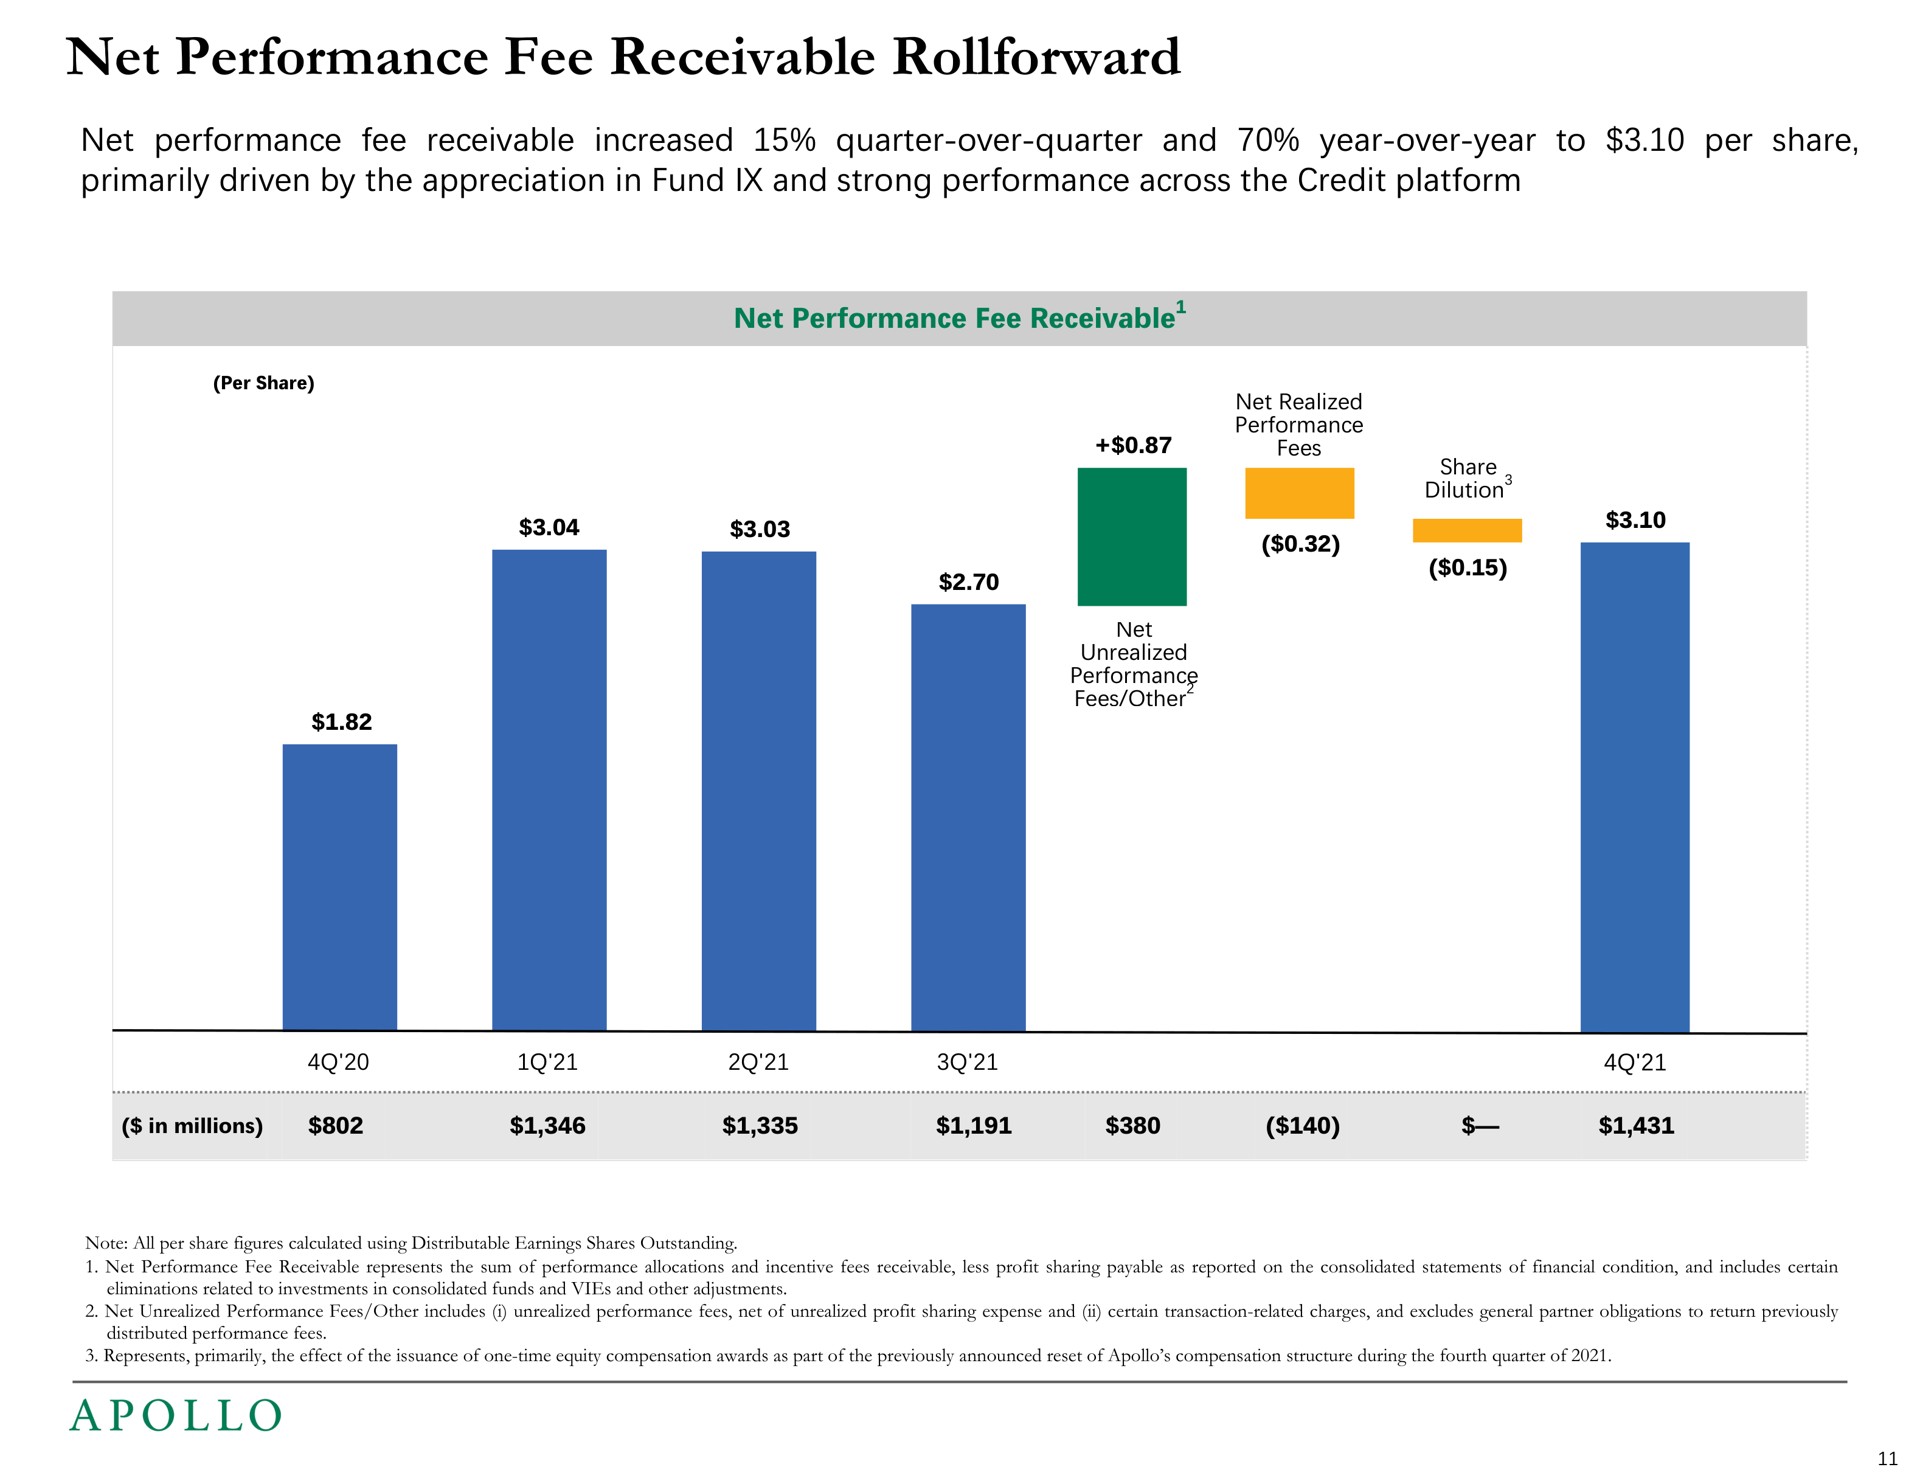 net performance fee receivable net performance fee receivable increased quarter over quarter and year over year to per share primarily driven by the appreciation in fund and strong performance across the credit platform | Apollo Global Management